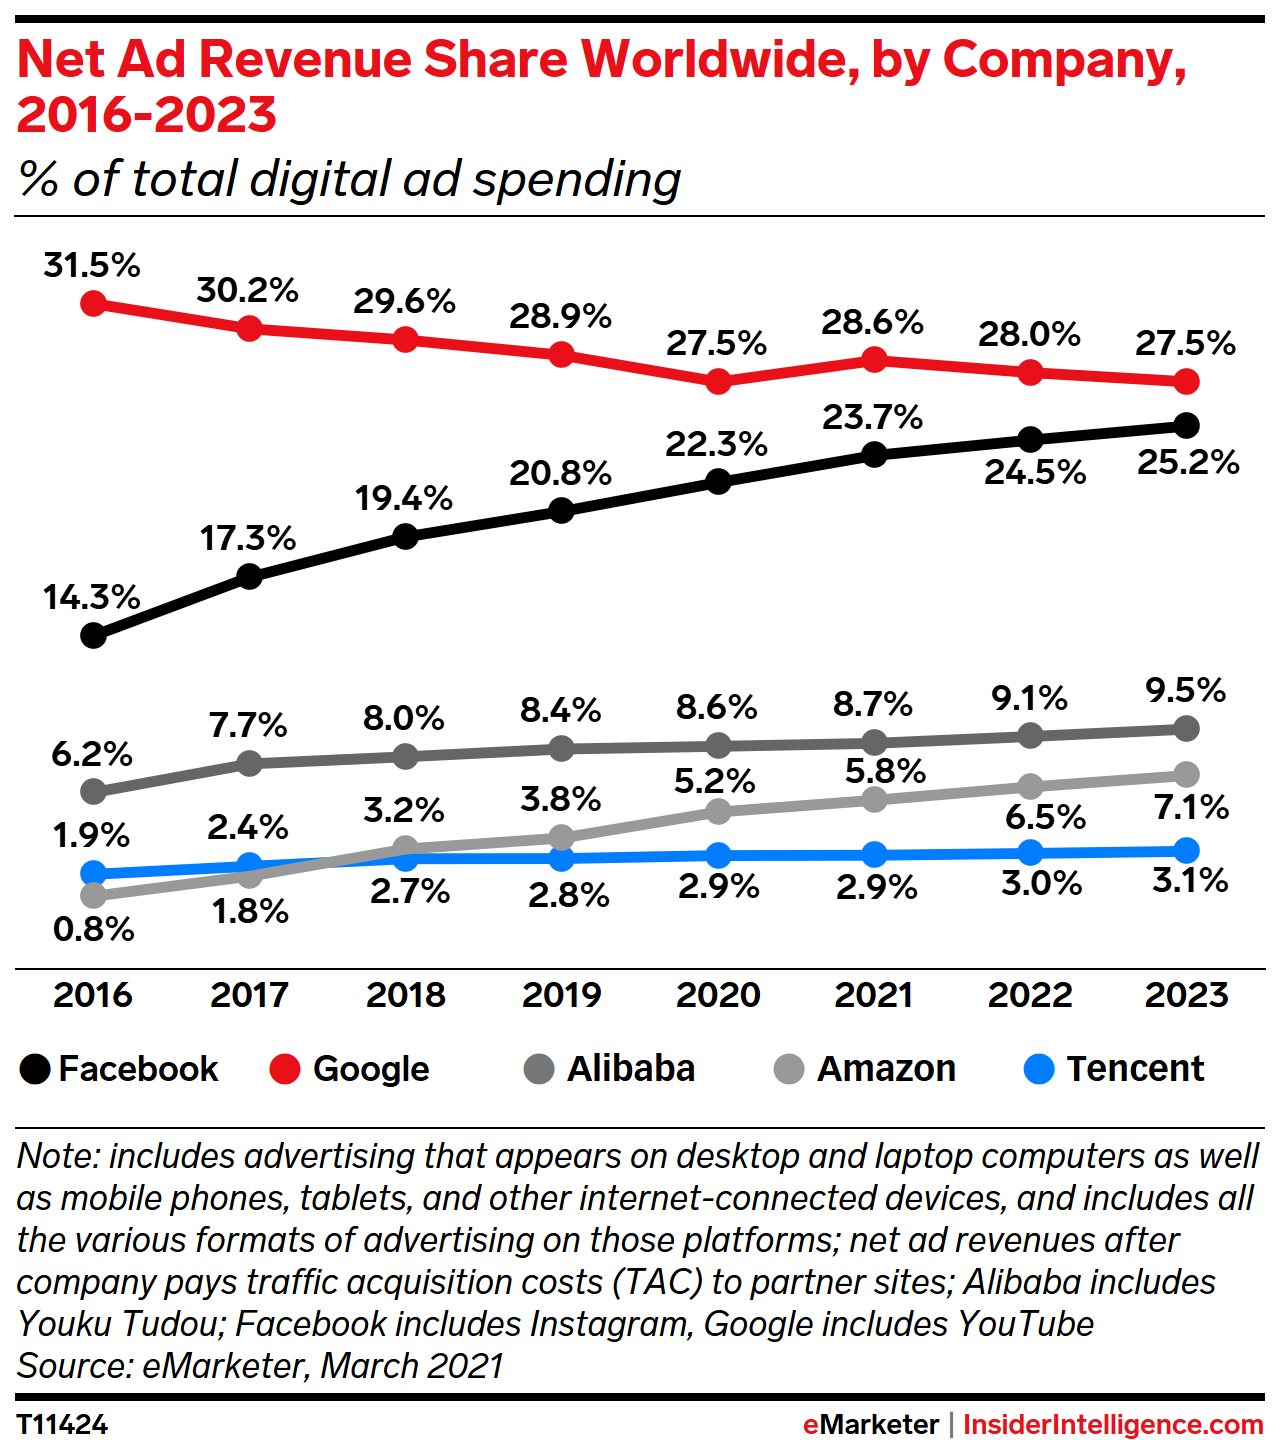 Duopoly still rules the global digital ad market, but Alibaba and Amazon  are on the prowl - Insider Intelligence Trends, Forecasts & Statistics